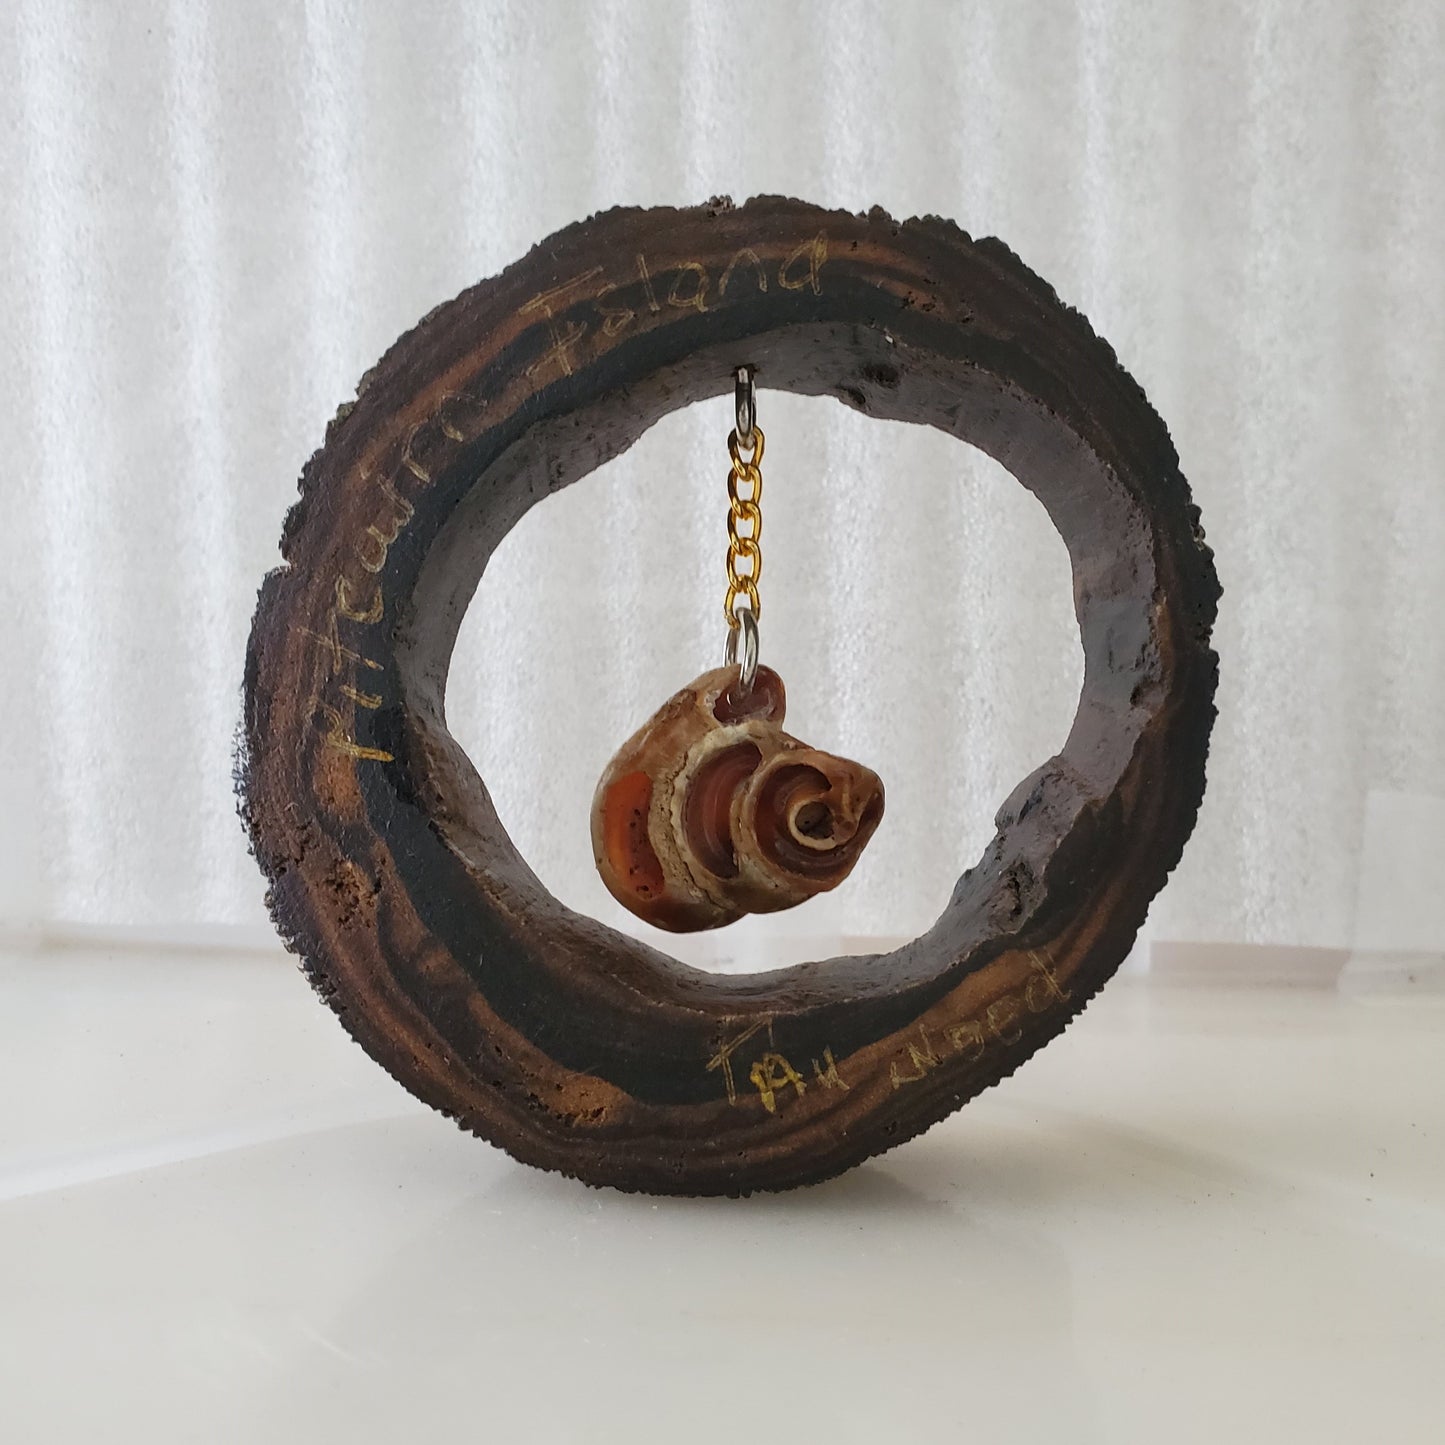 Hand carved Tree Branch Circle with a Bitey-Bitey Shell - from Local Tau